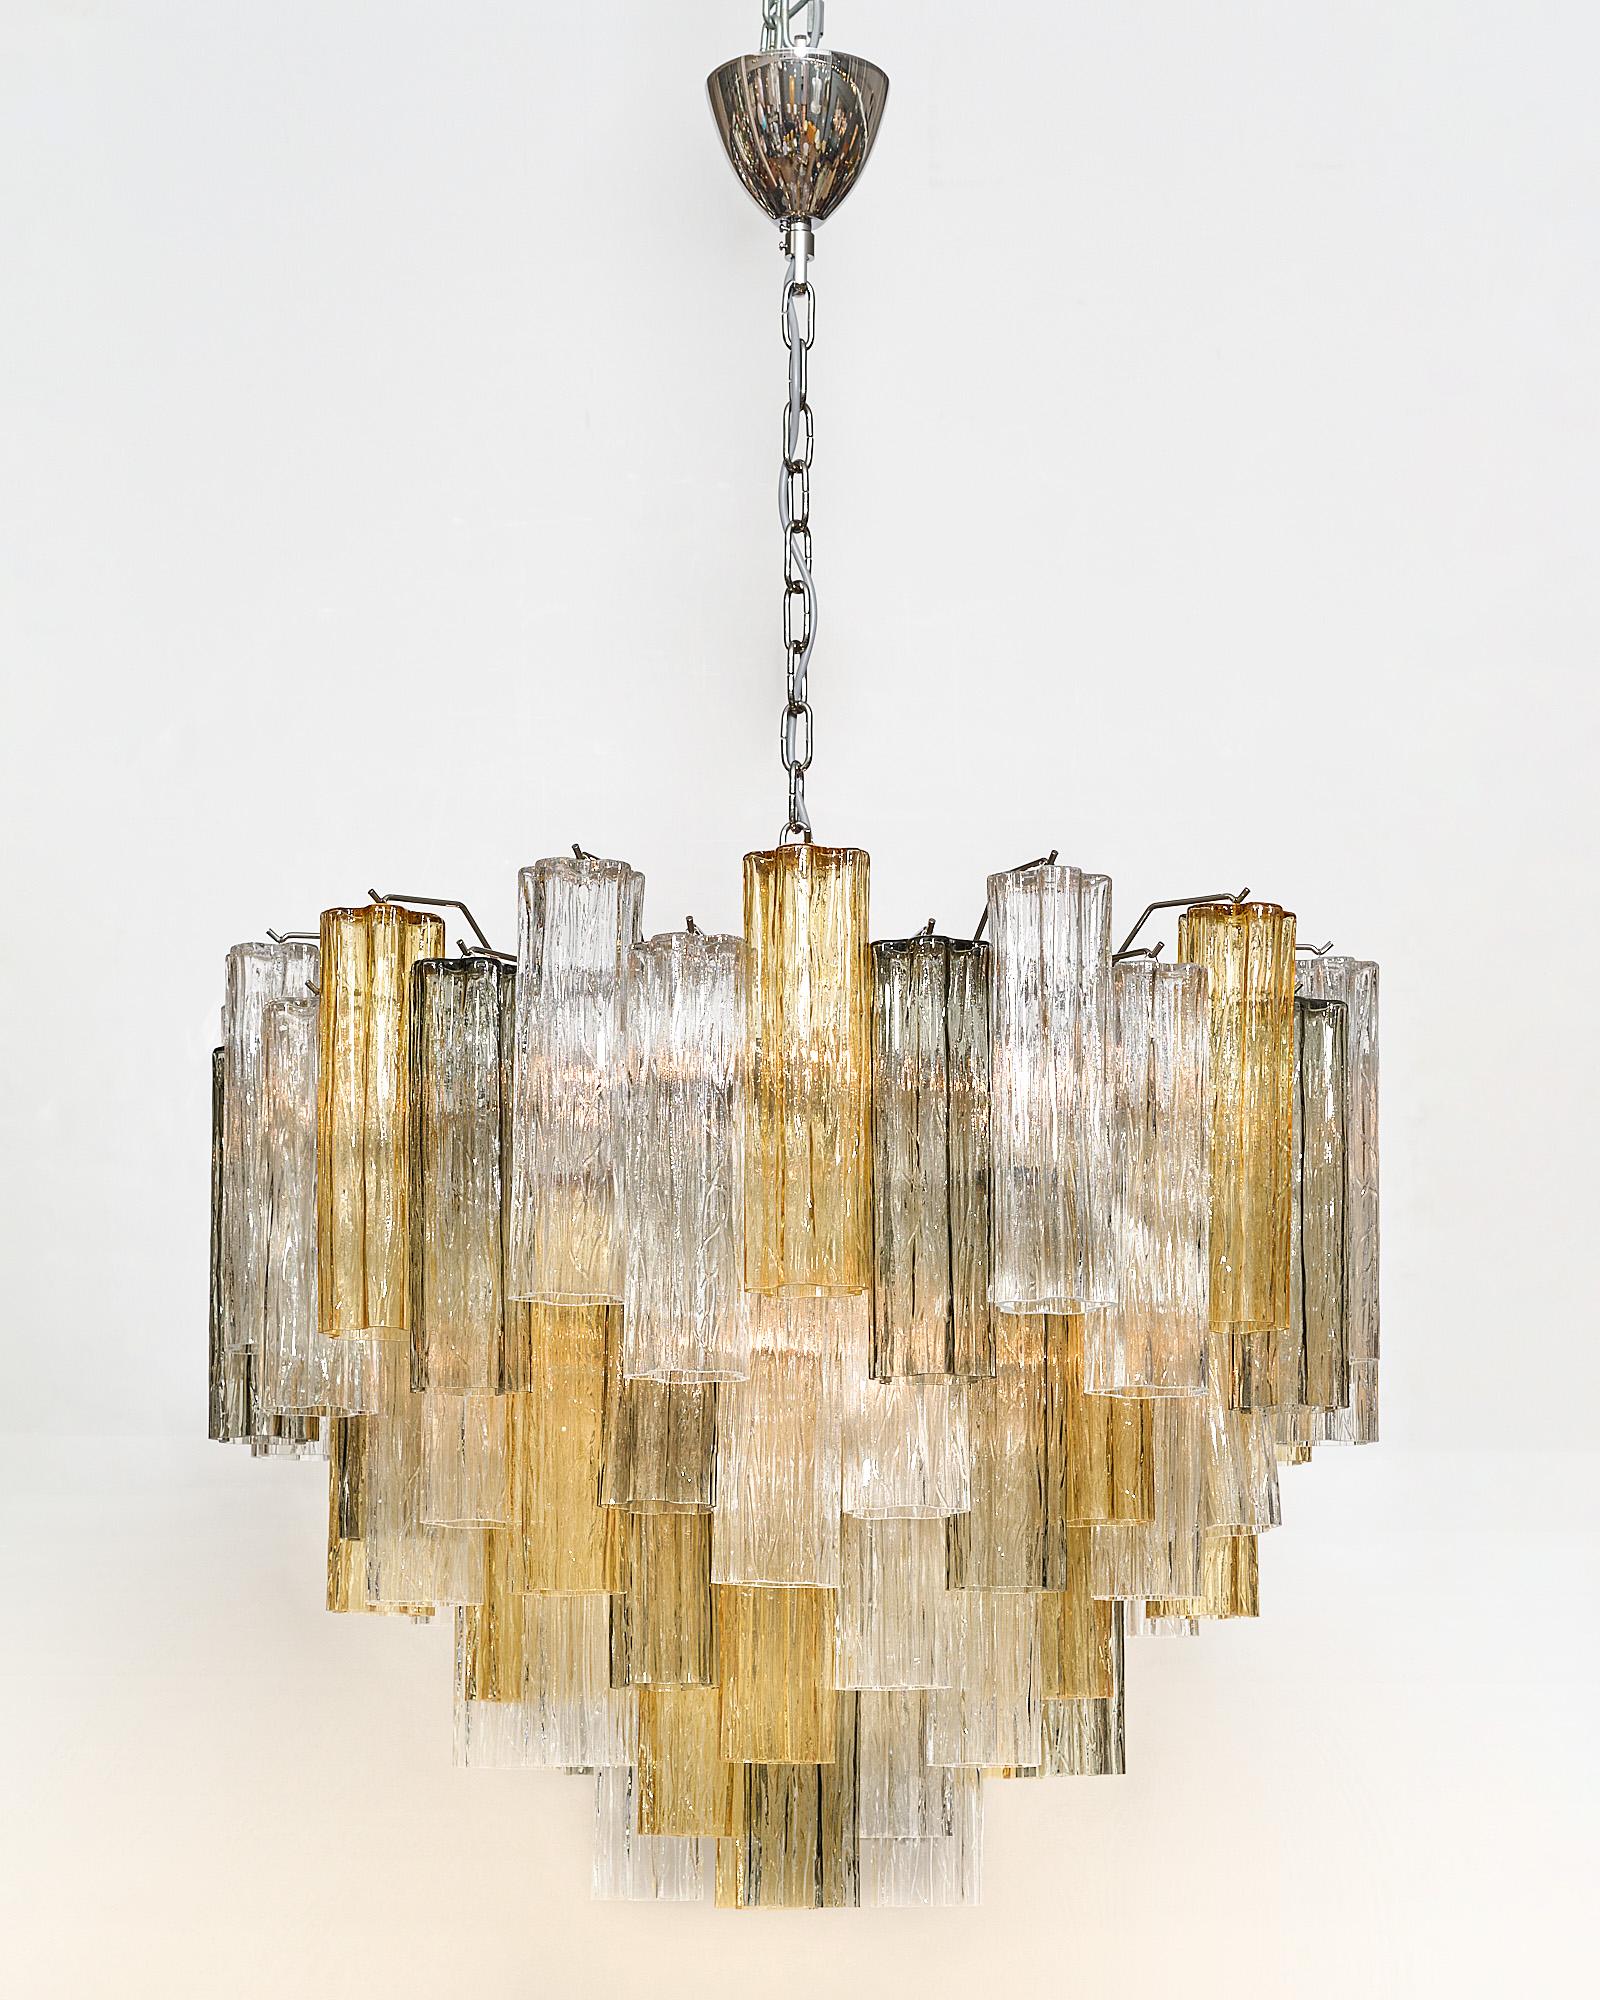 Murano glass chandelier from Italy with hand-blown glass elements in the “tronchi” shape. This fixture has amber, smoked, and clear glass and has been newly wired to fit US standards.